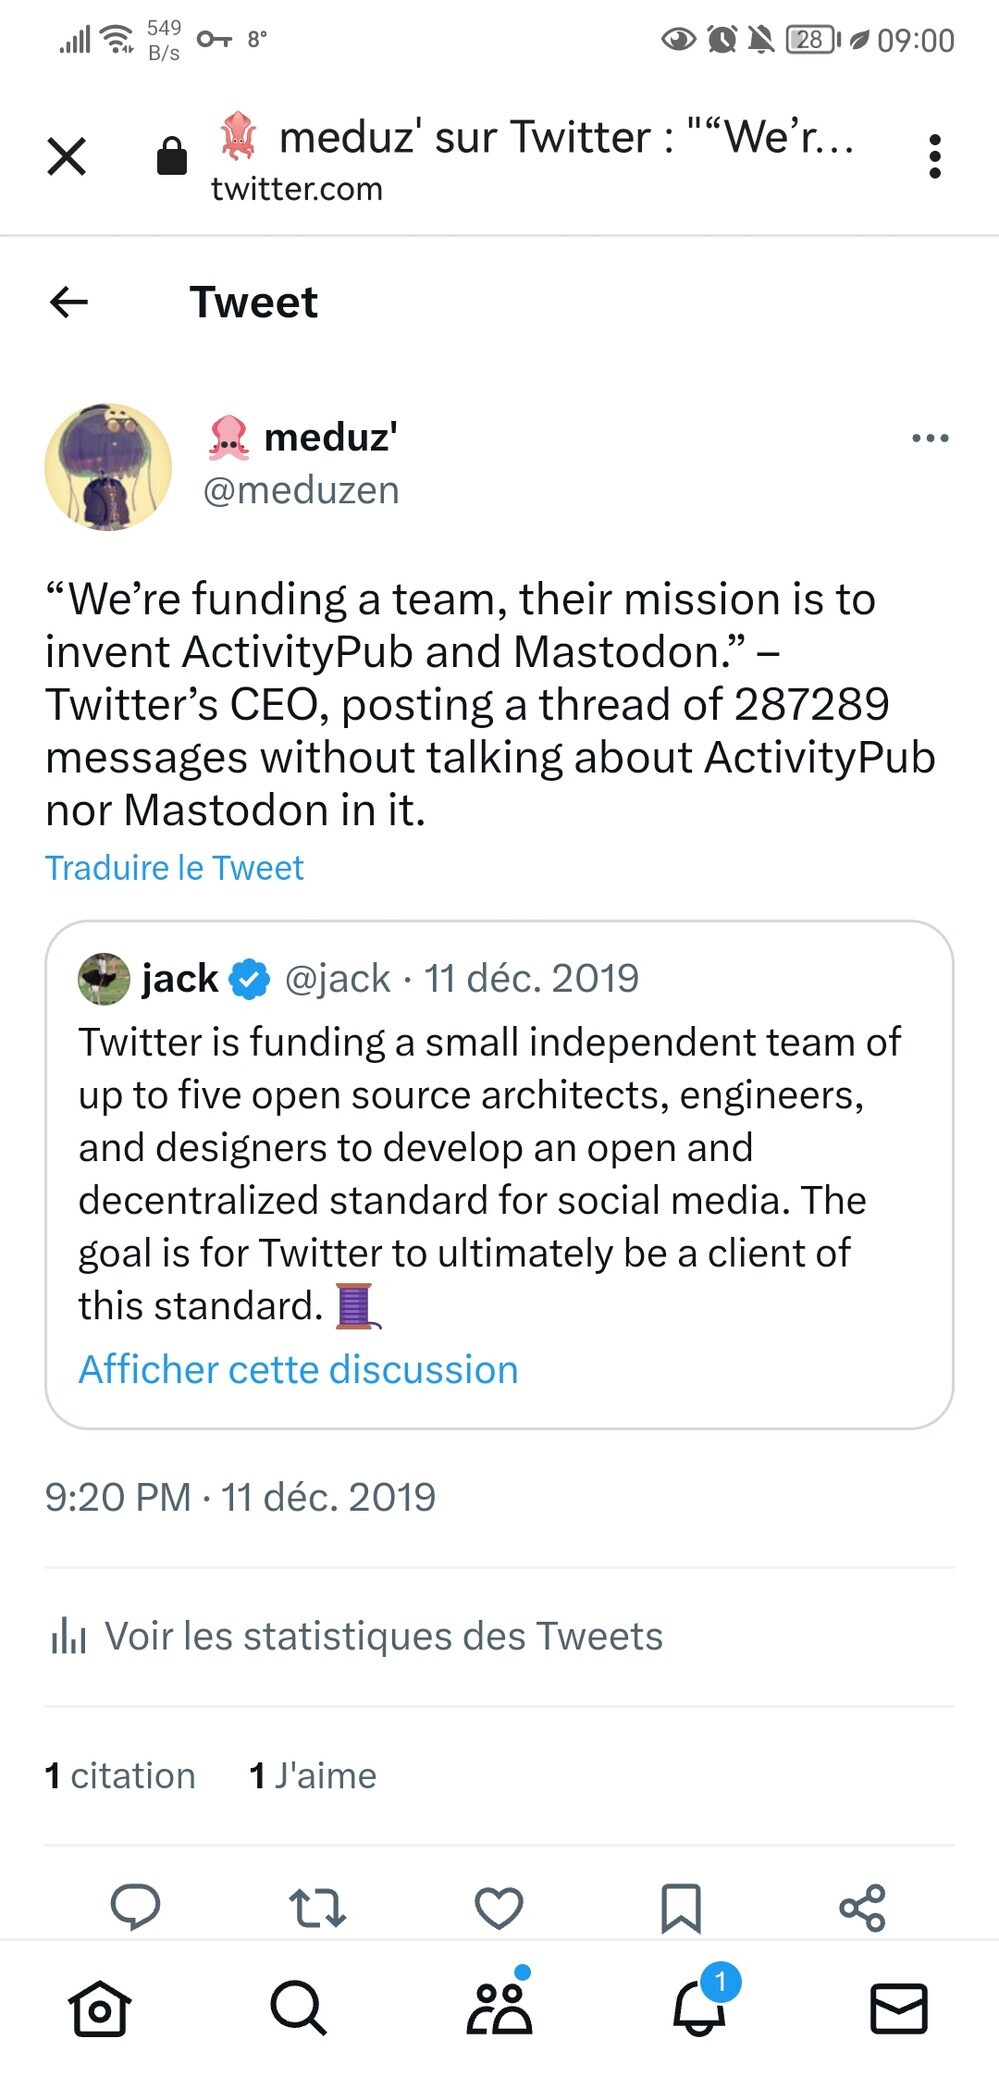 Me, quoting Jack Dorsey on Twitter and pointing that he’s trying to invent ActivityPub and Mastodon by saying in December 2019: “Twitter is funding a small independent team of up to five open source architects, engineers, and designers to develop an open and decentralized standard for social media. The goal is for Twitter to ultimately be a client of this standard. 🧵”.